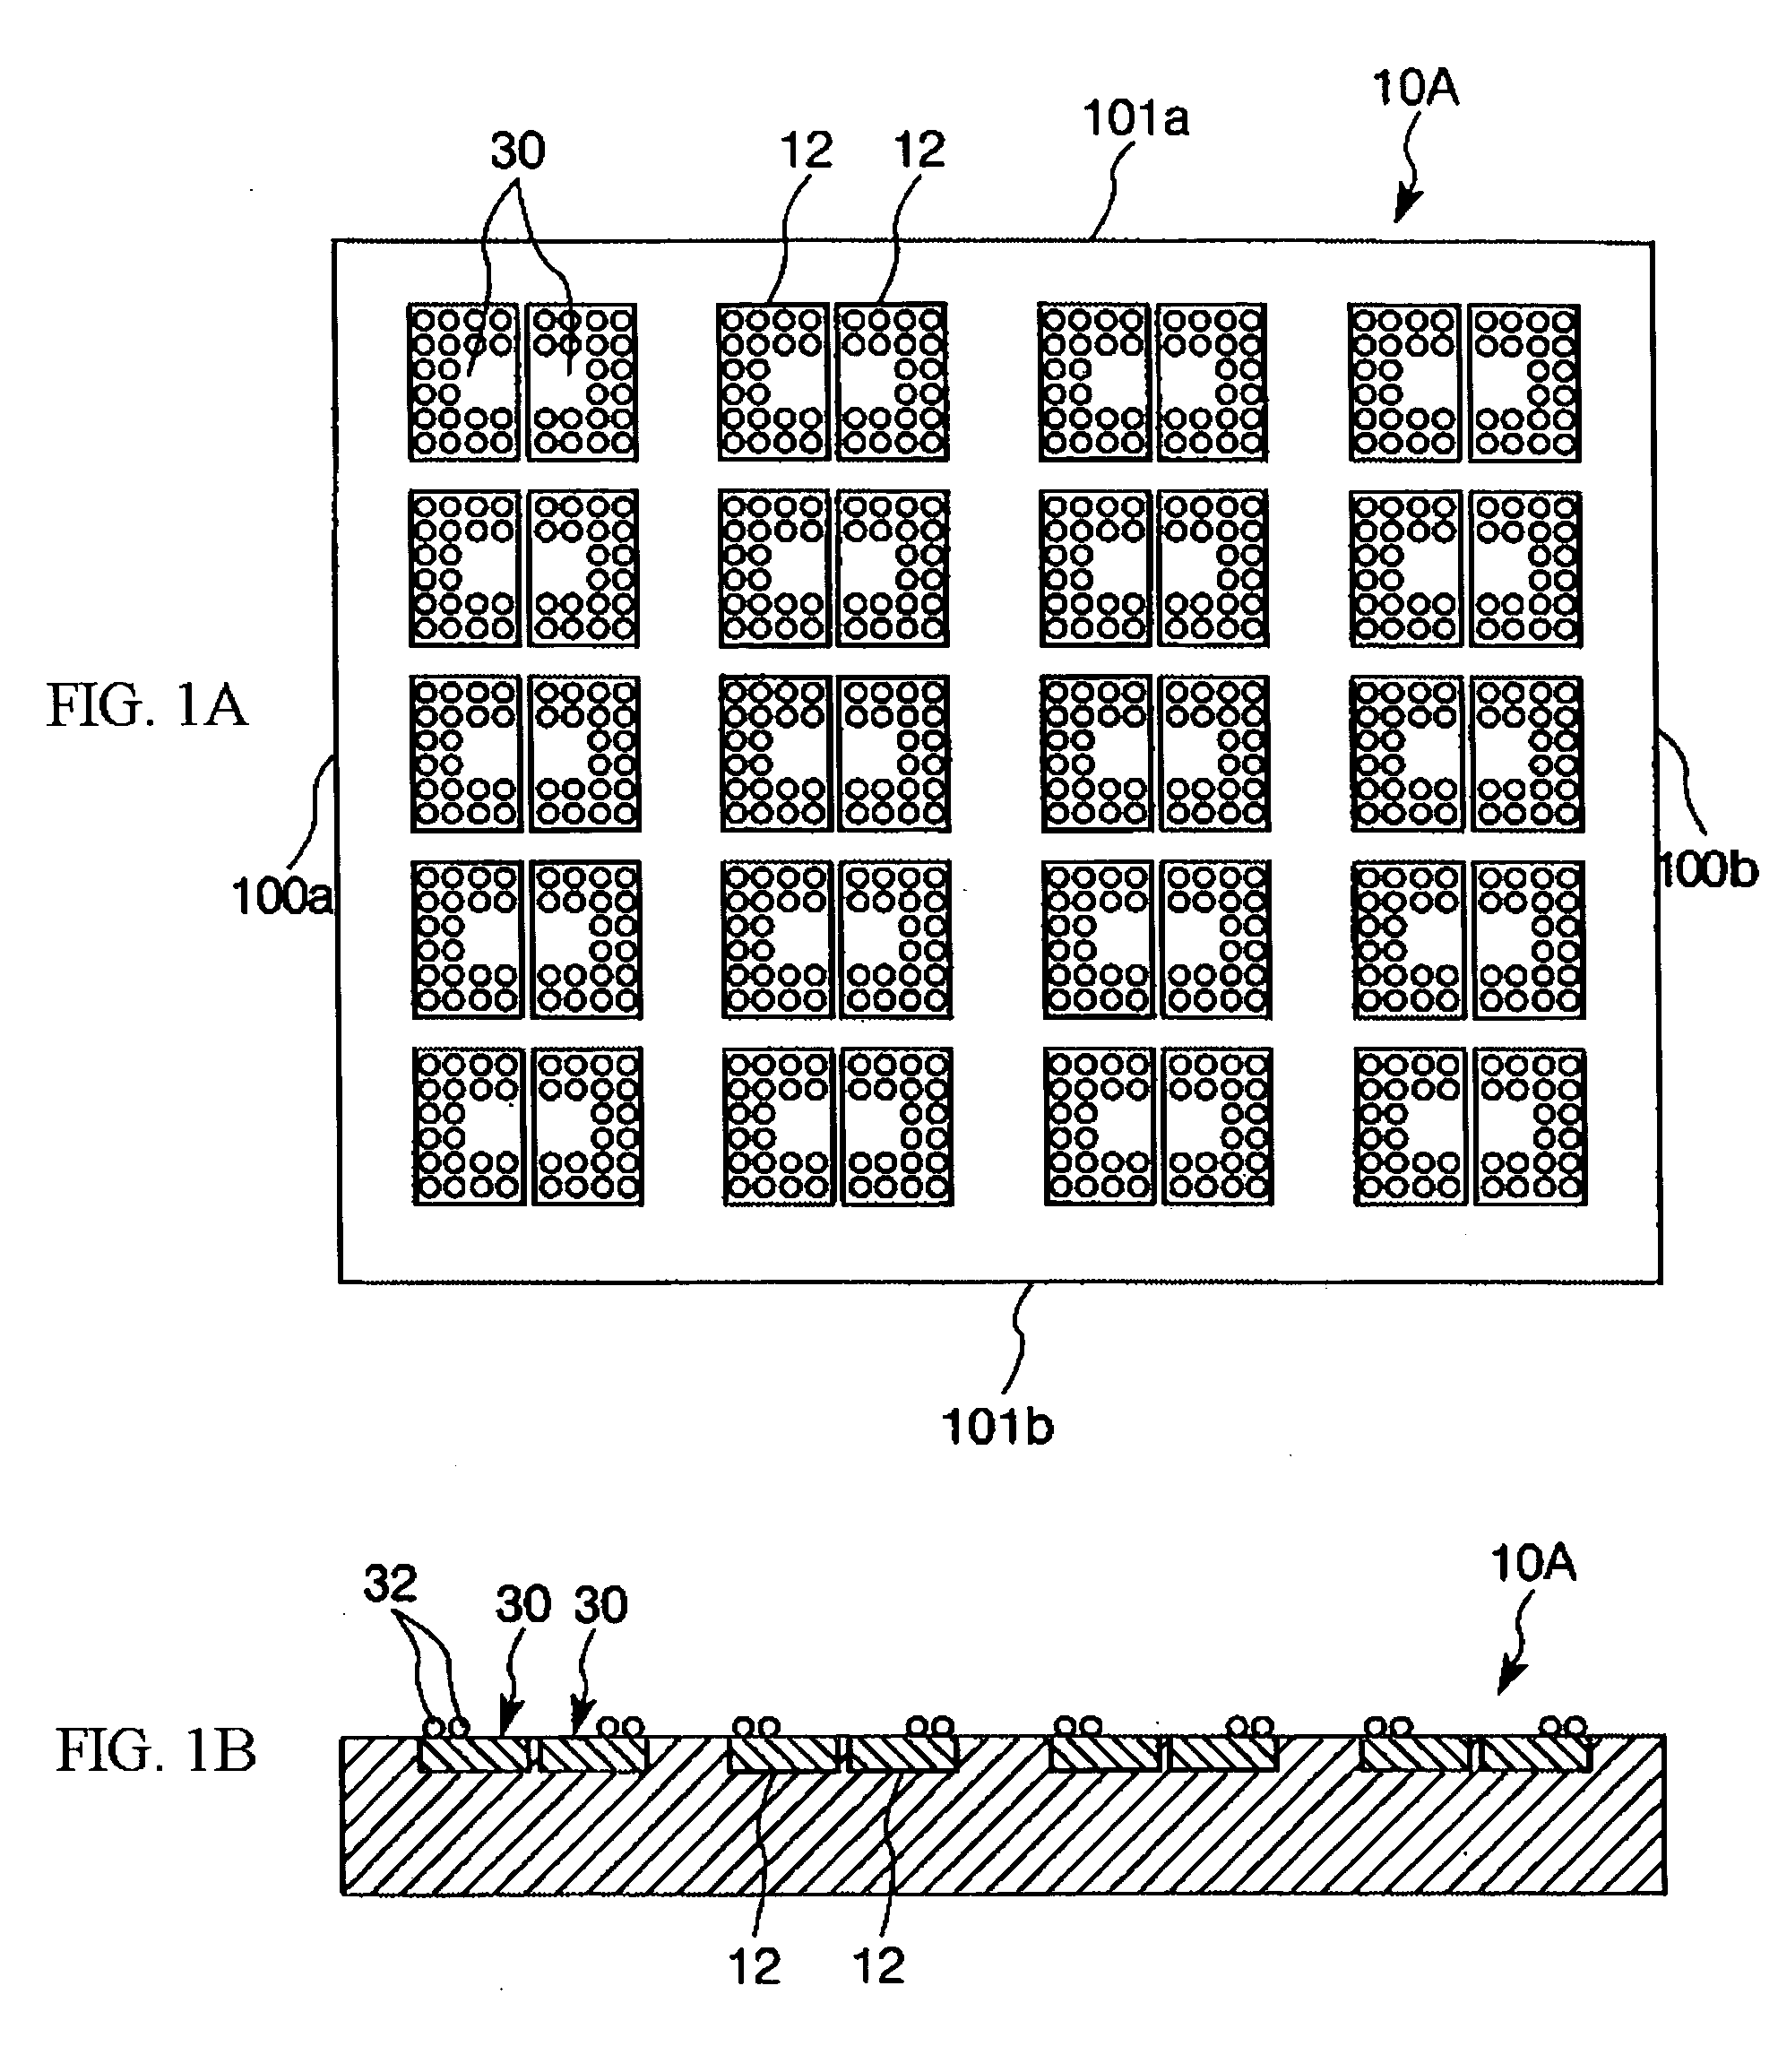 Apparatus for manufacturing semiconductor devices, method of manufacturing the semiconductor devices, and semiconductor device manufactured by the apparatus and method